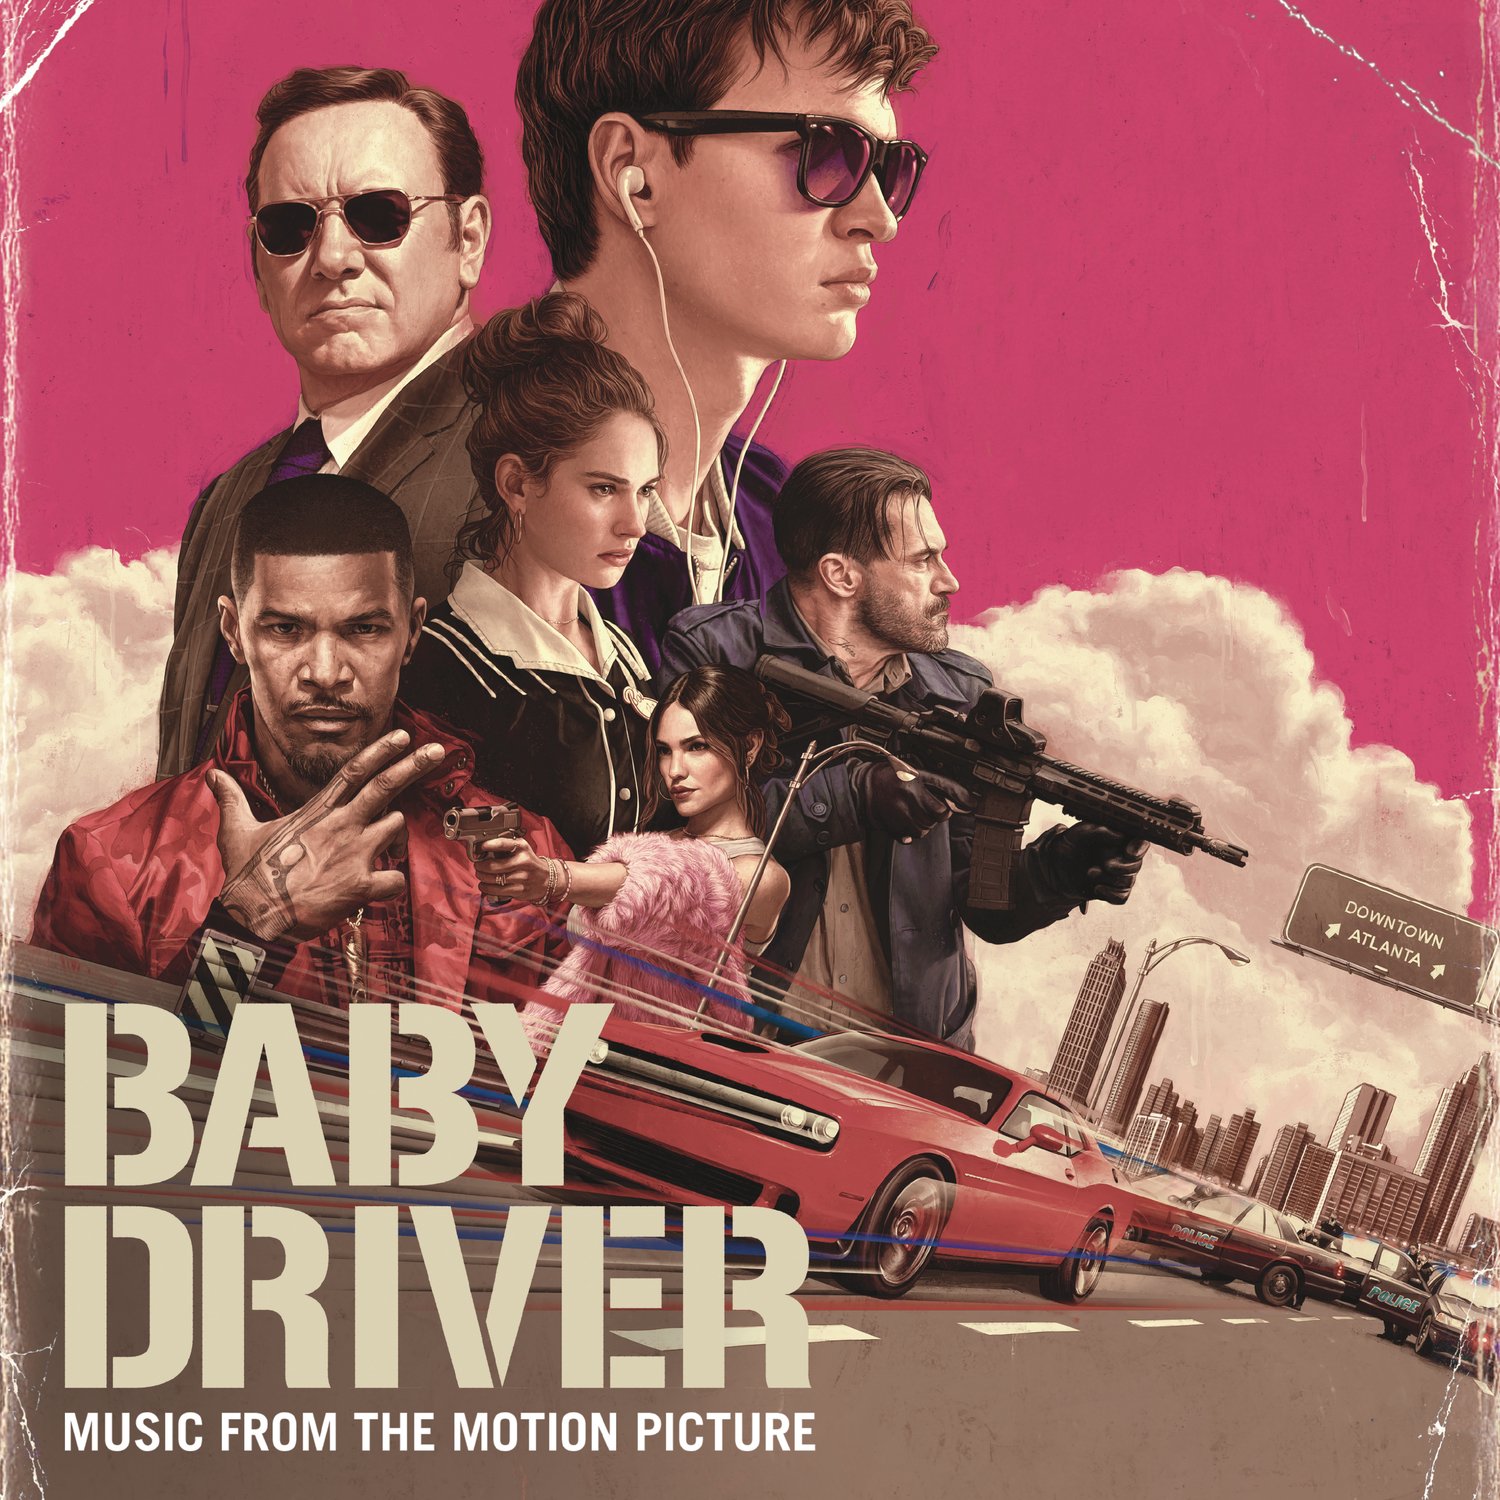 Album artwork for the film Baby Driver’s soundtrack featuring actors Ansel Elgort, Lily James, Jon Hamm, Eiza Gonzalez, Jamie Foxx, and Kevin Spacey.